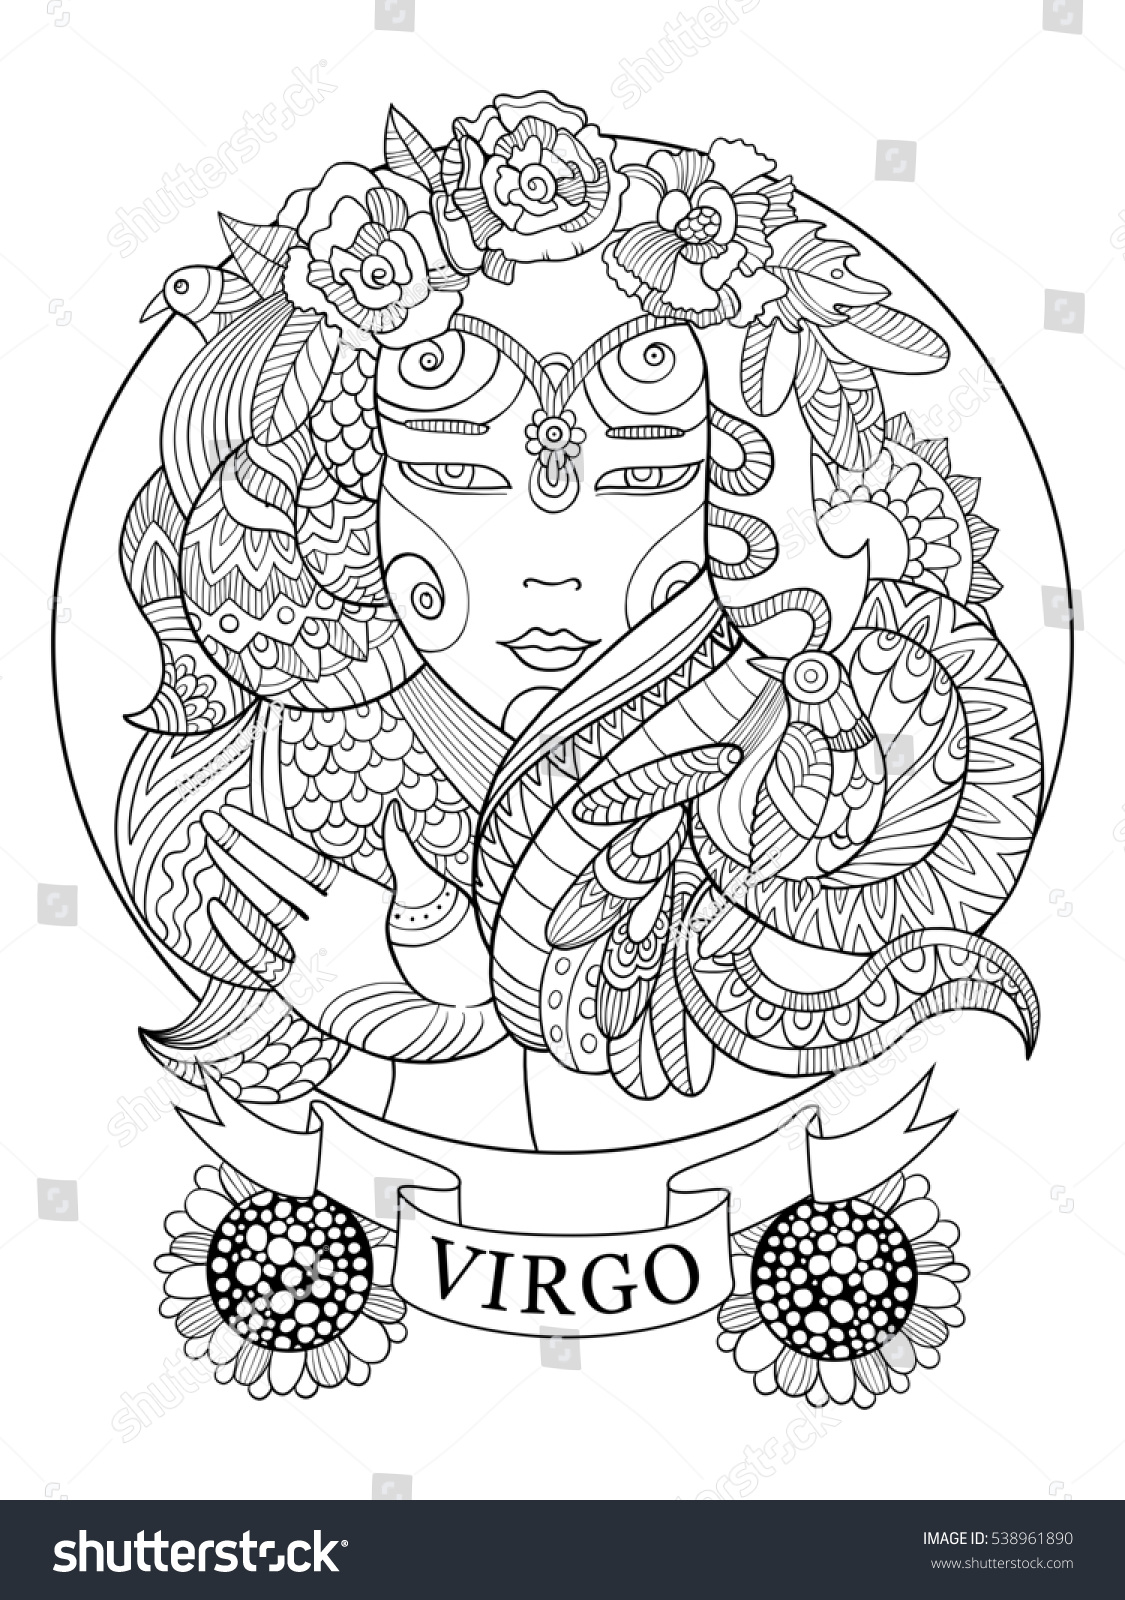 Virgo zodiac sign coloring book for adults raster illustration Anti stress coloring for adult